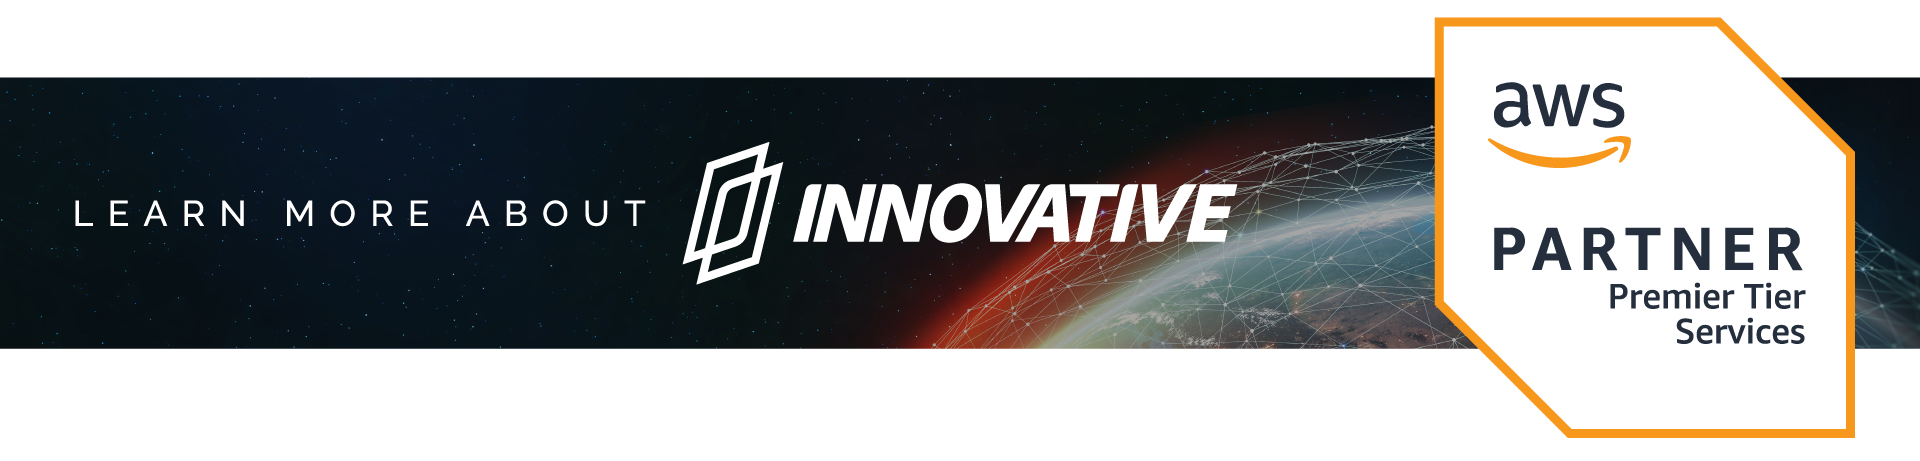 Learn more about Innovative